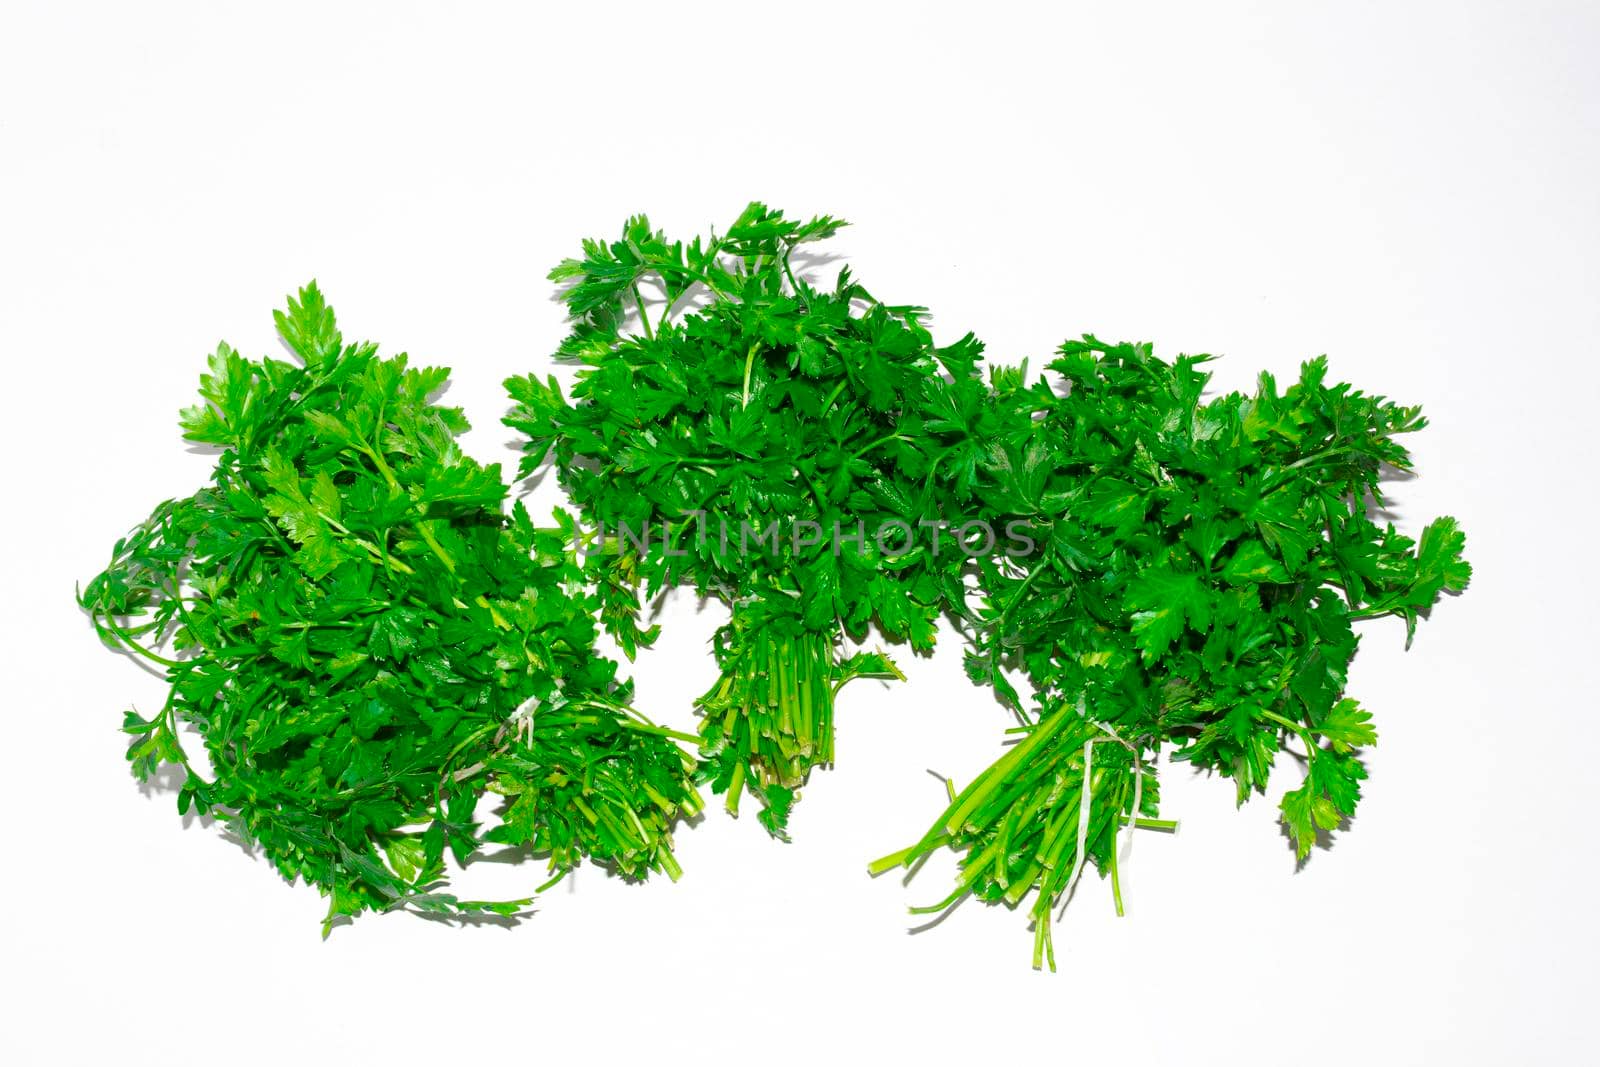 Three bundles of healthy parsley by bybyphotography